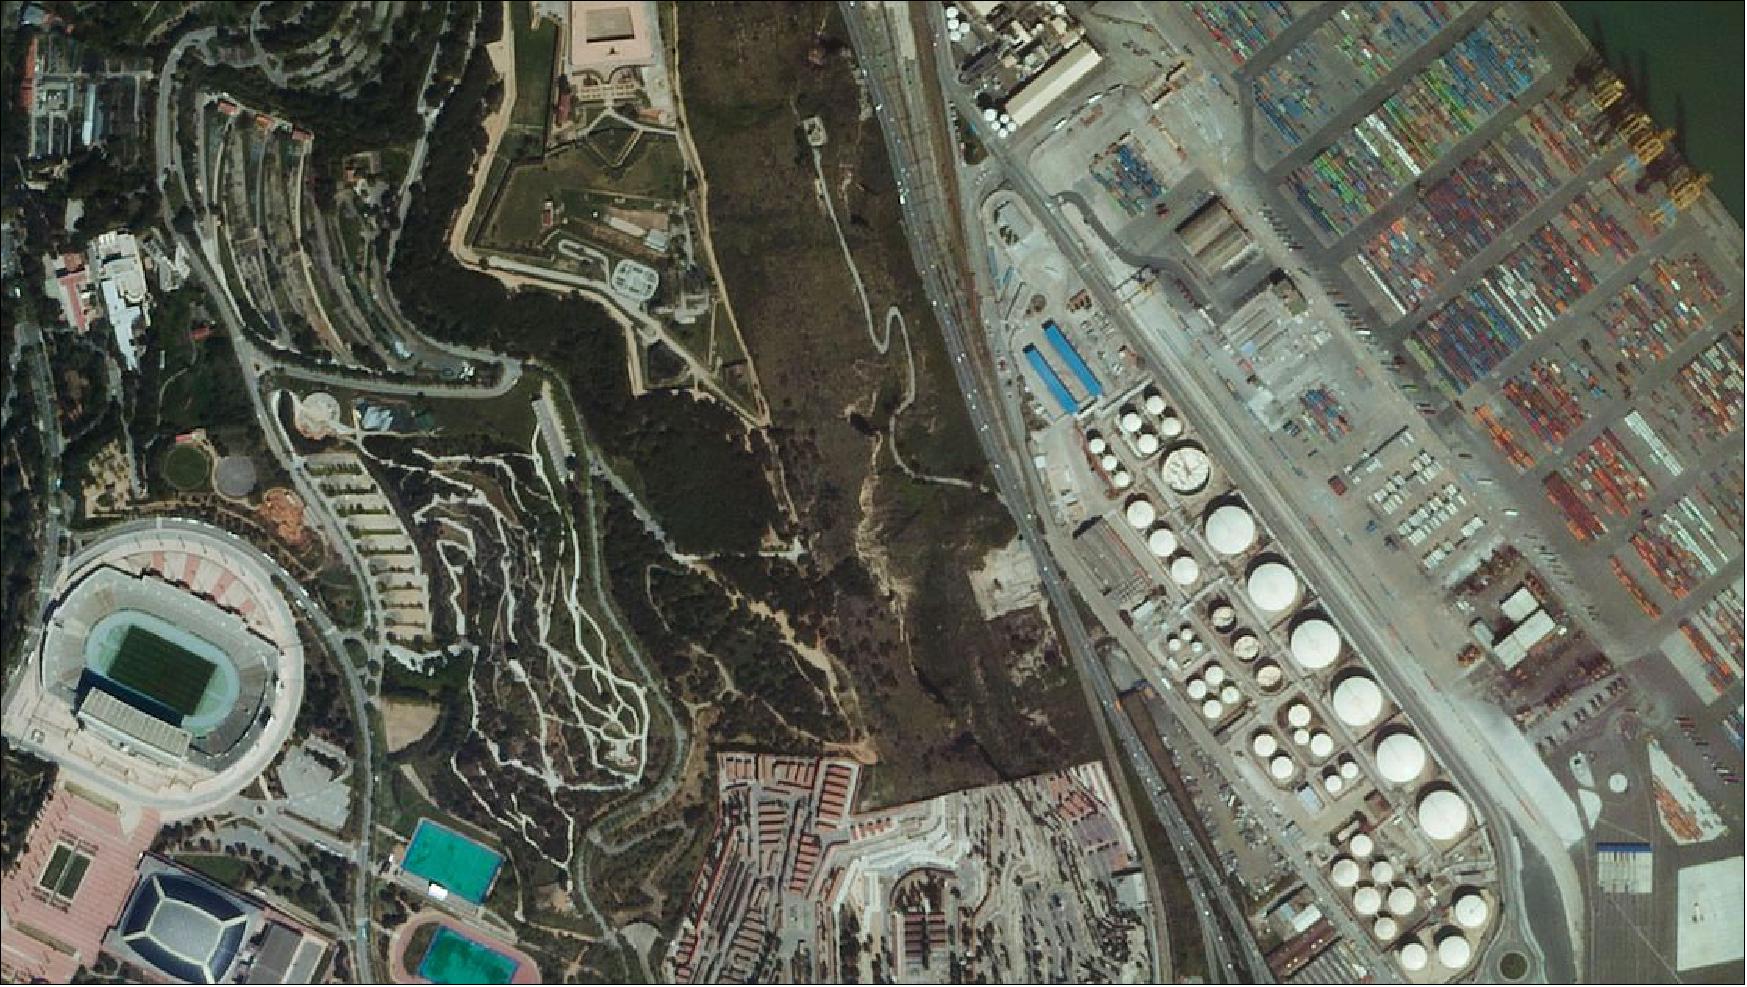 Figure 8: Image of Barcelona, Spain, acquired from the Iris camera (image credit: UrtheCast)